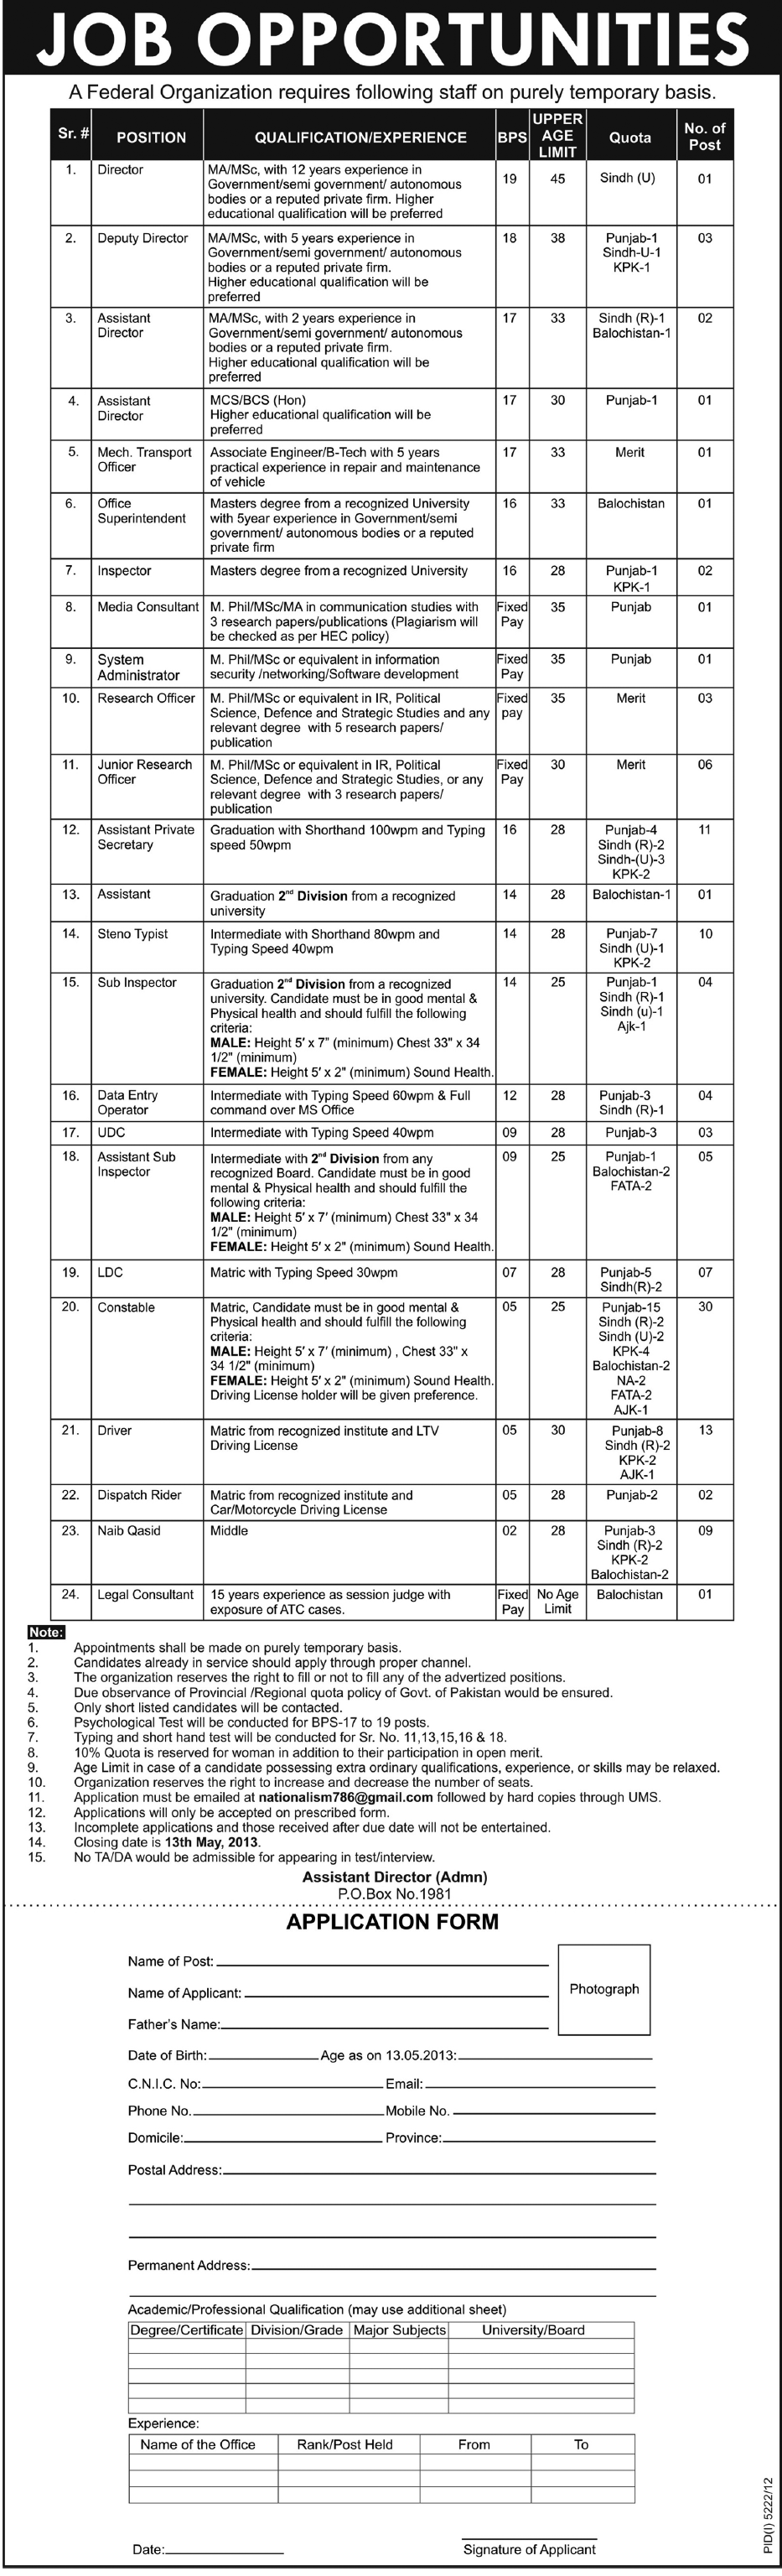 Federal Government of Pakistan Jobs 2013